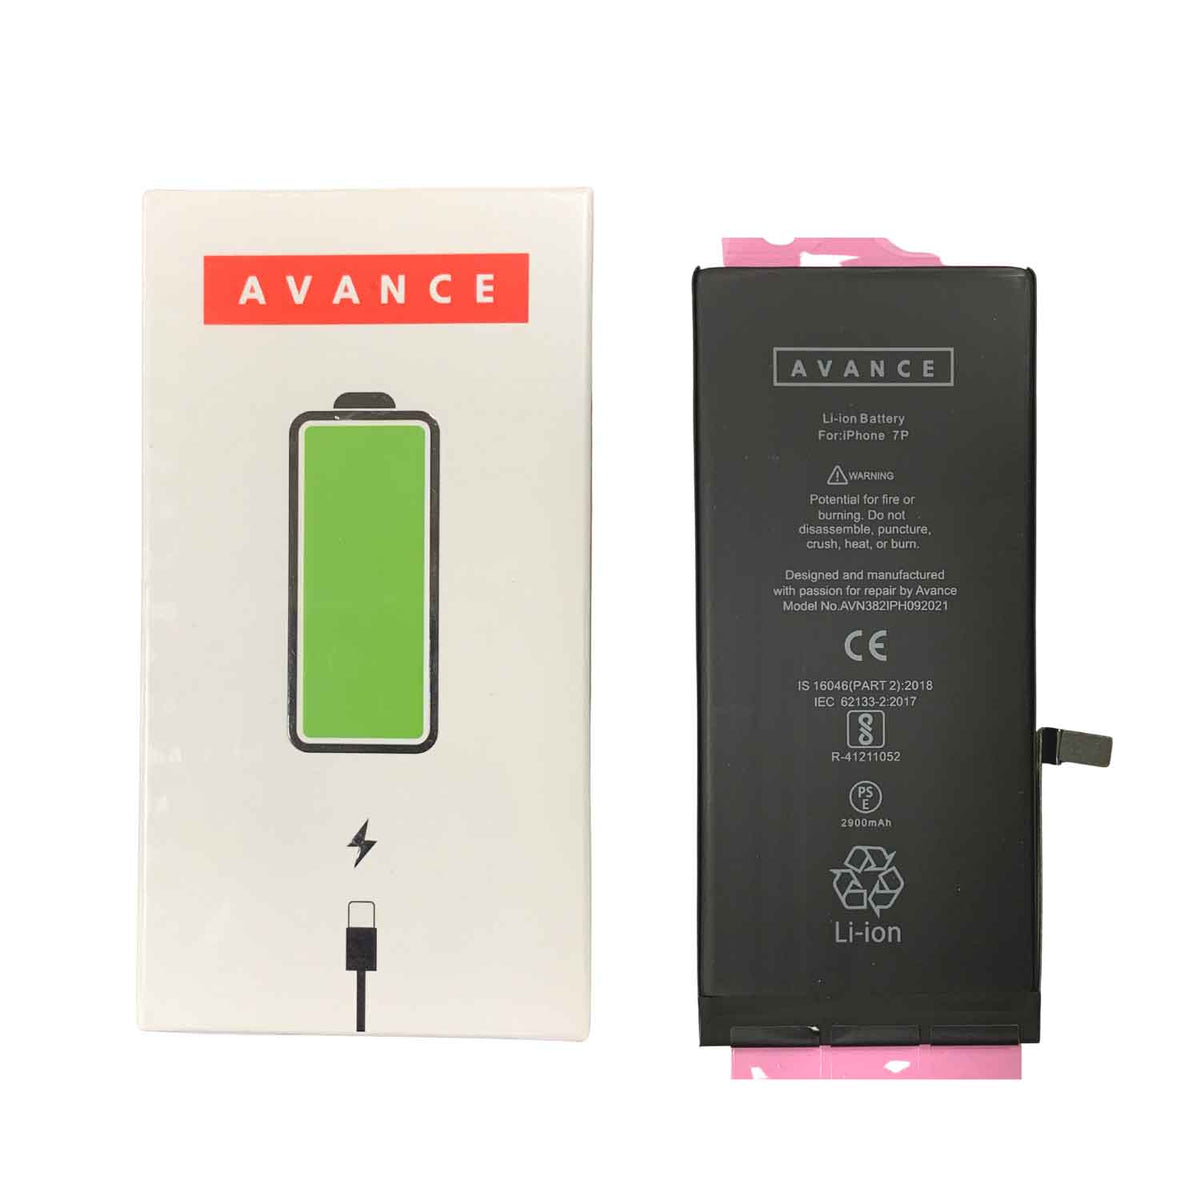 Avance battery for iPhone 7plus